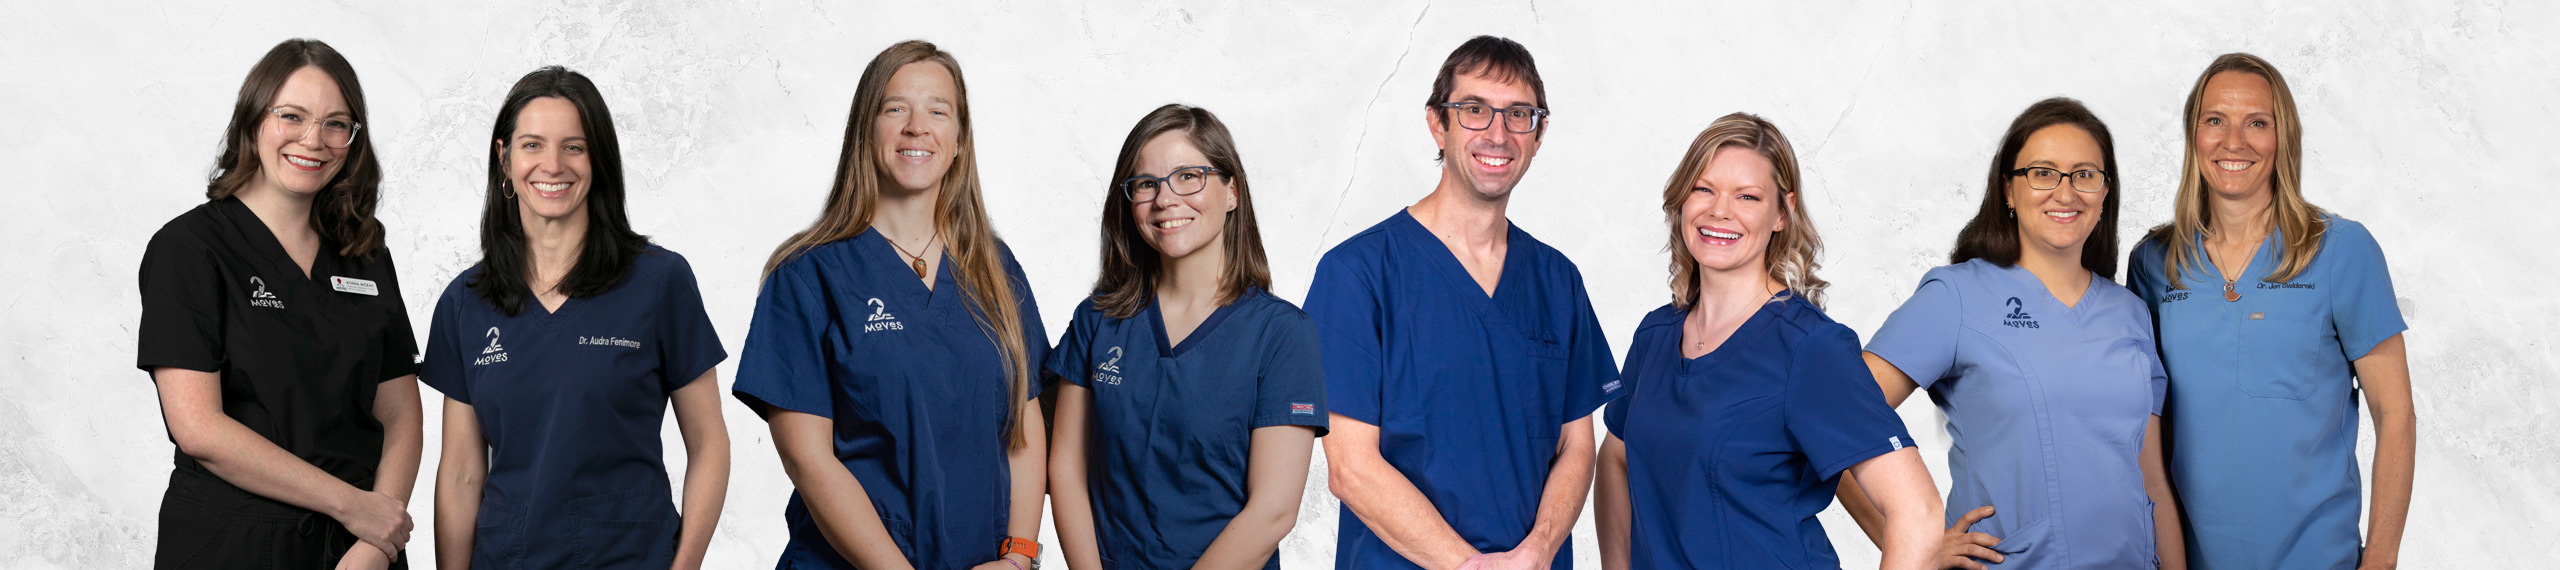 Portraits of MOVES mobile veterinary specialists staff team from the Front Range area of Colorado, including Drs. Fenimore, Monaghan, Nolan, and Swiderski.